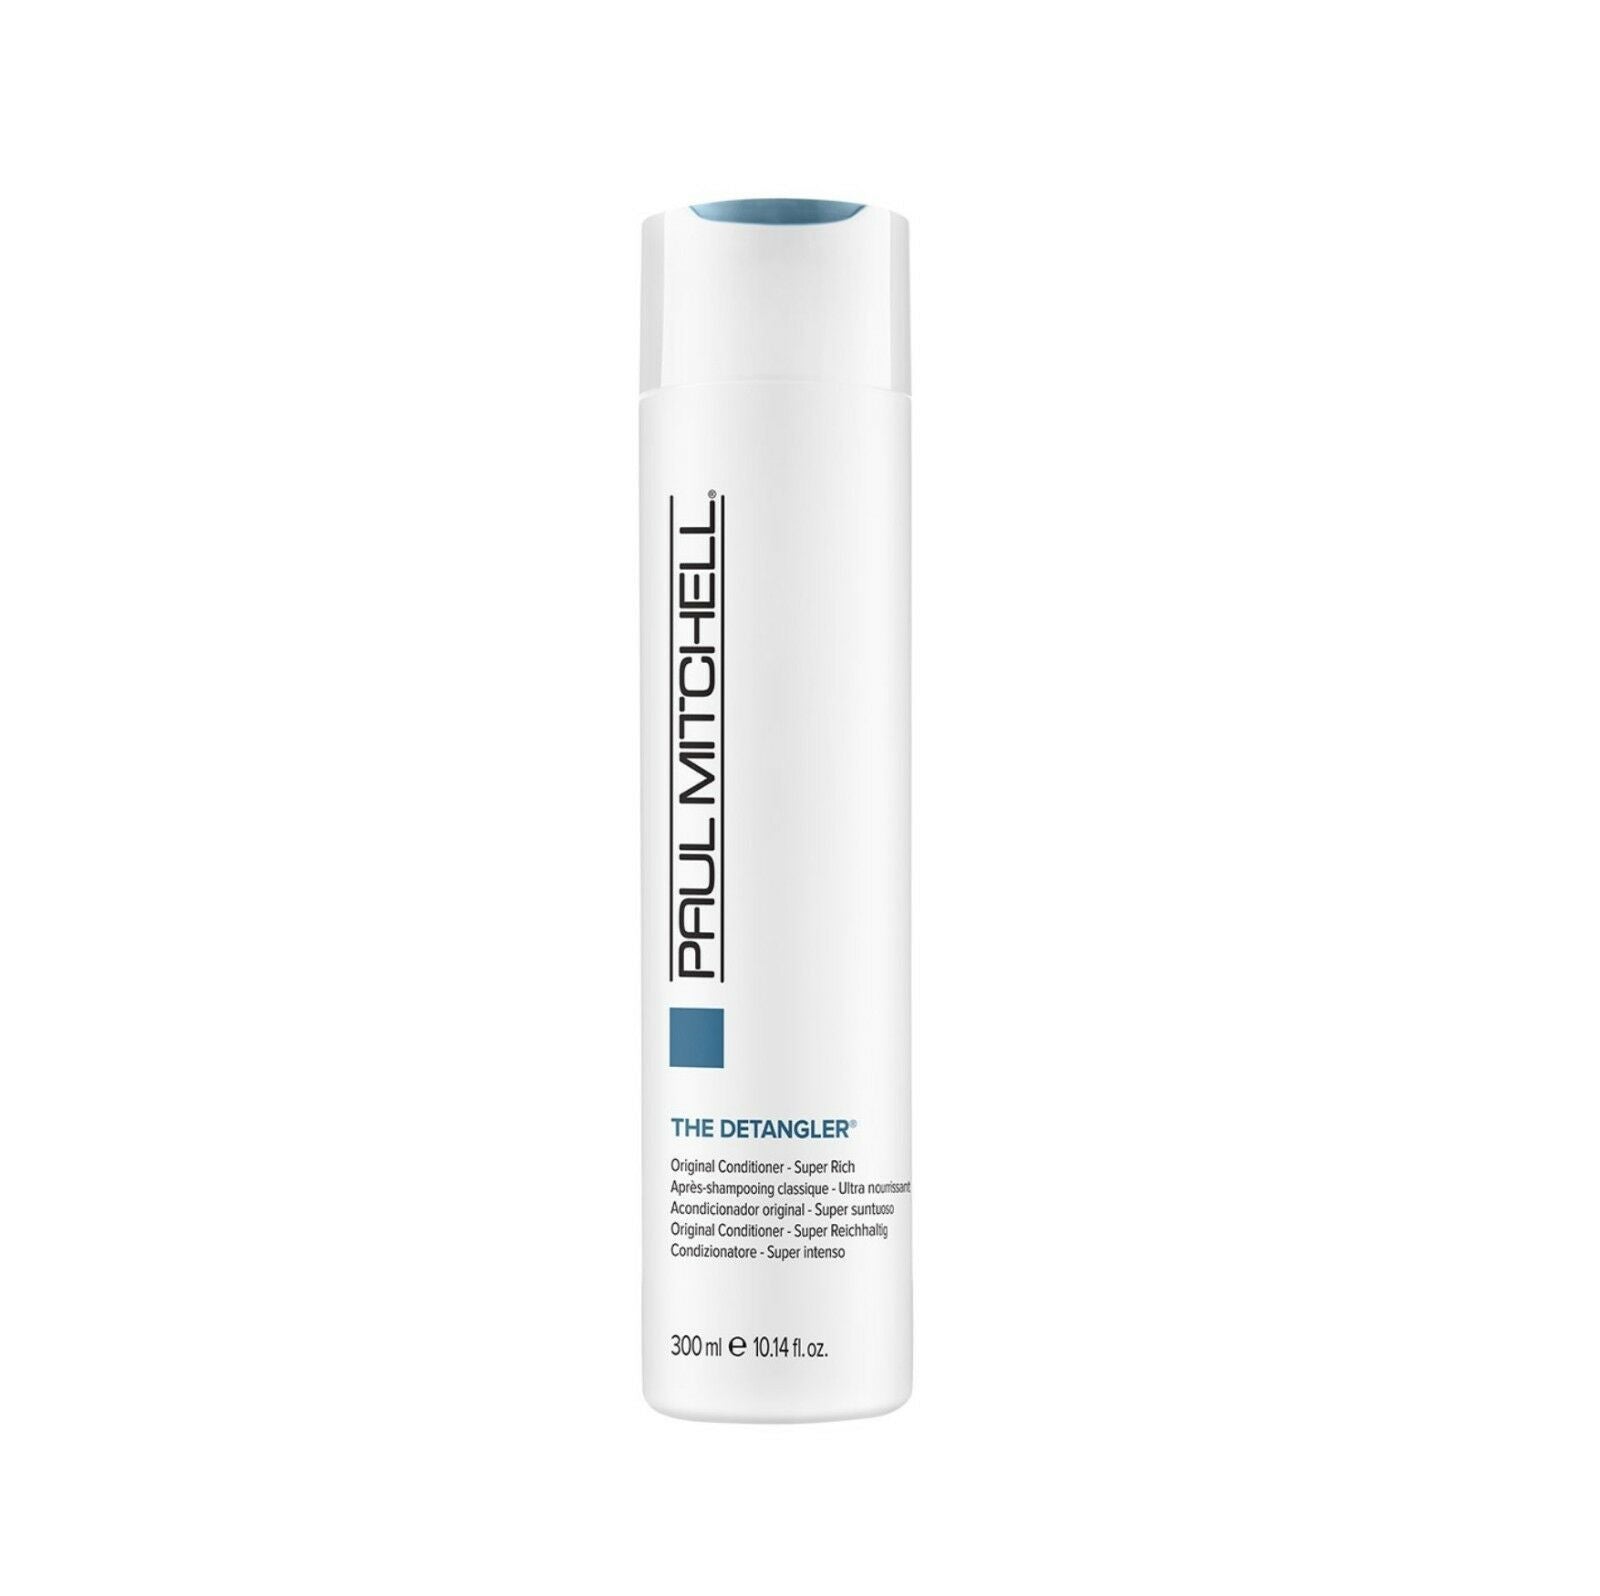 iaahhaircare,Paul Mitchell THE DETANGLER Original Conditioner. Super Rich 300ml,Shampoos & Conditioners,Paul Mitchell